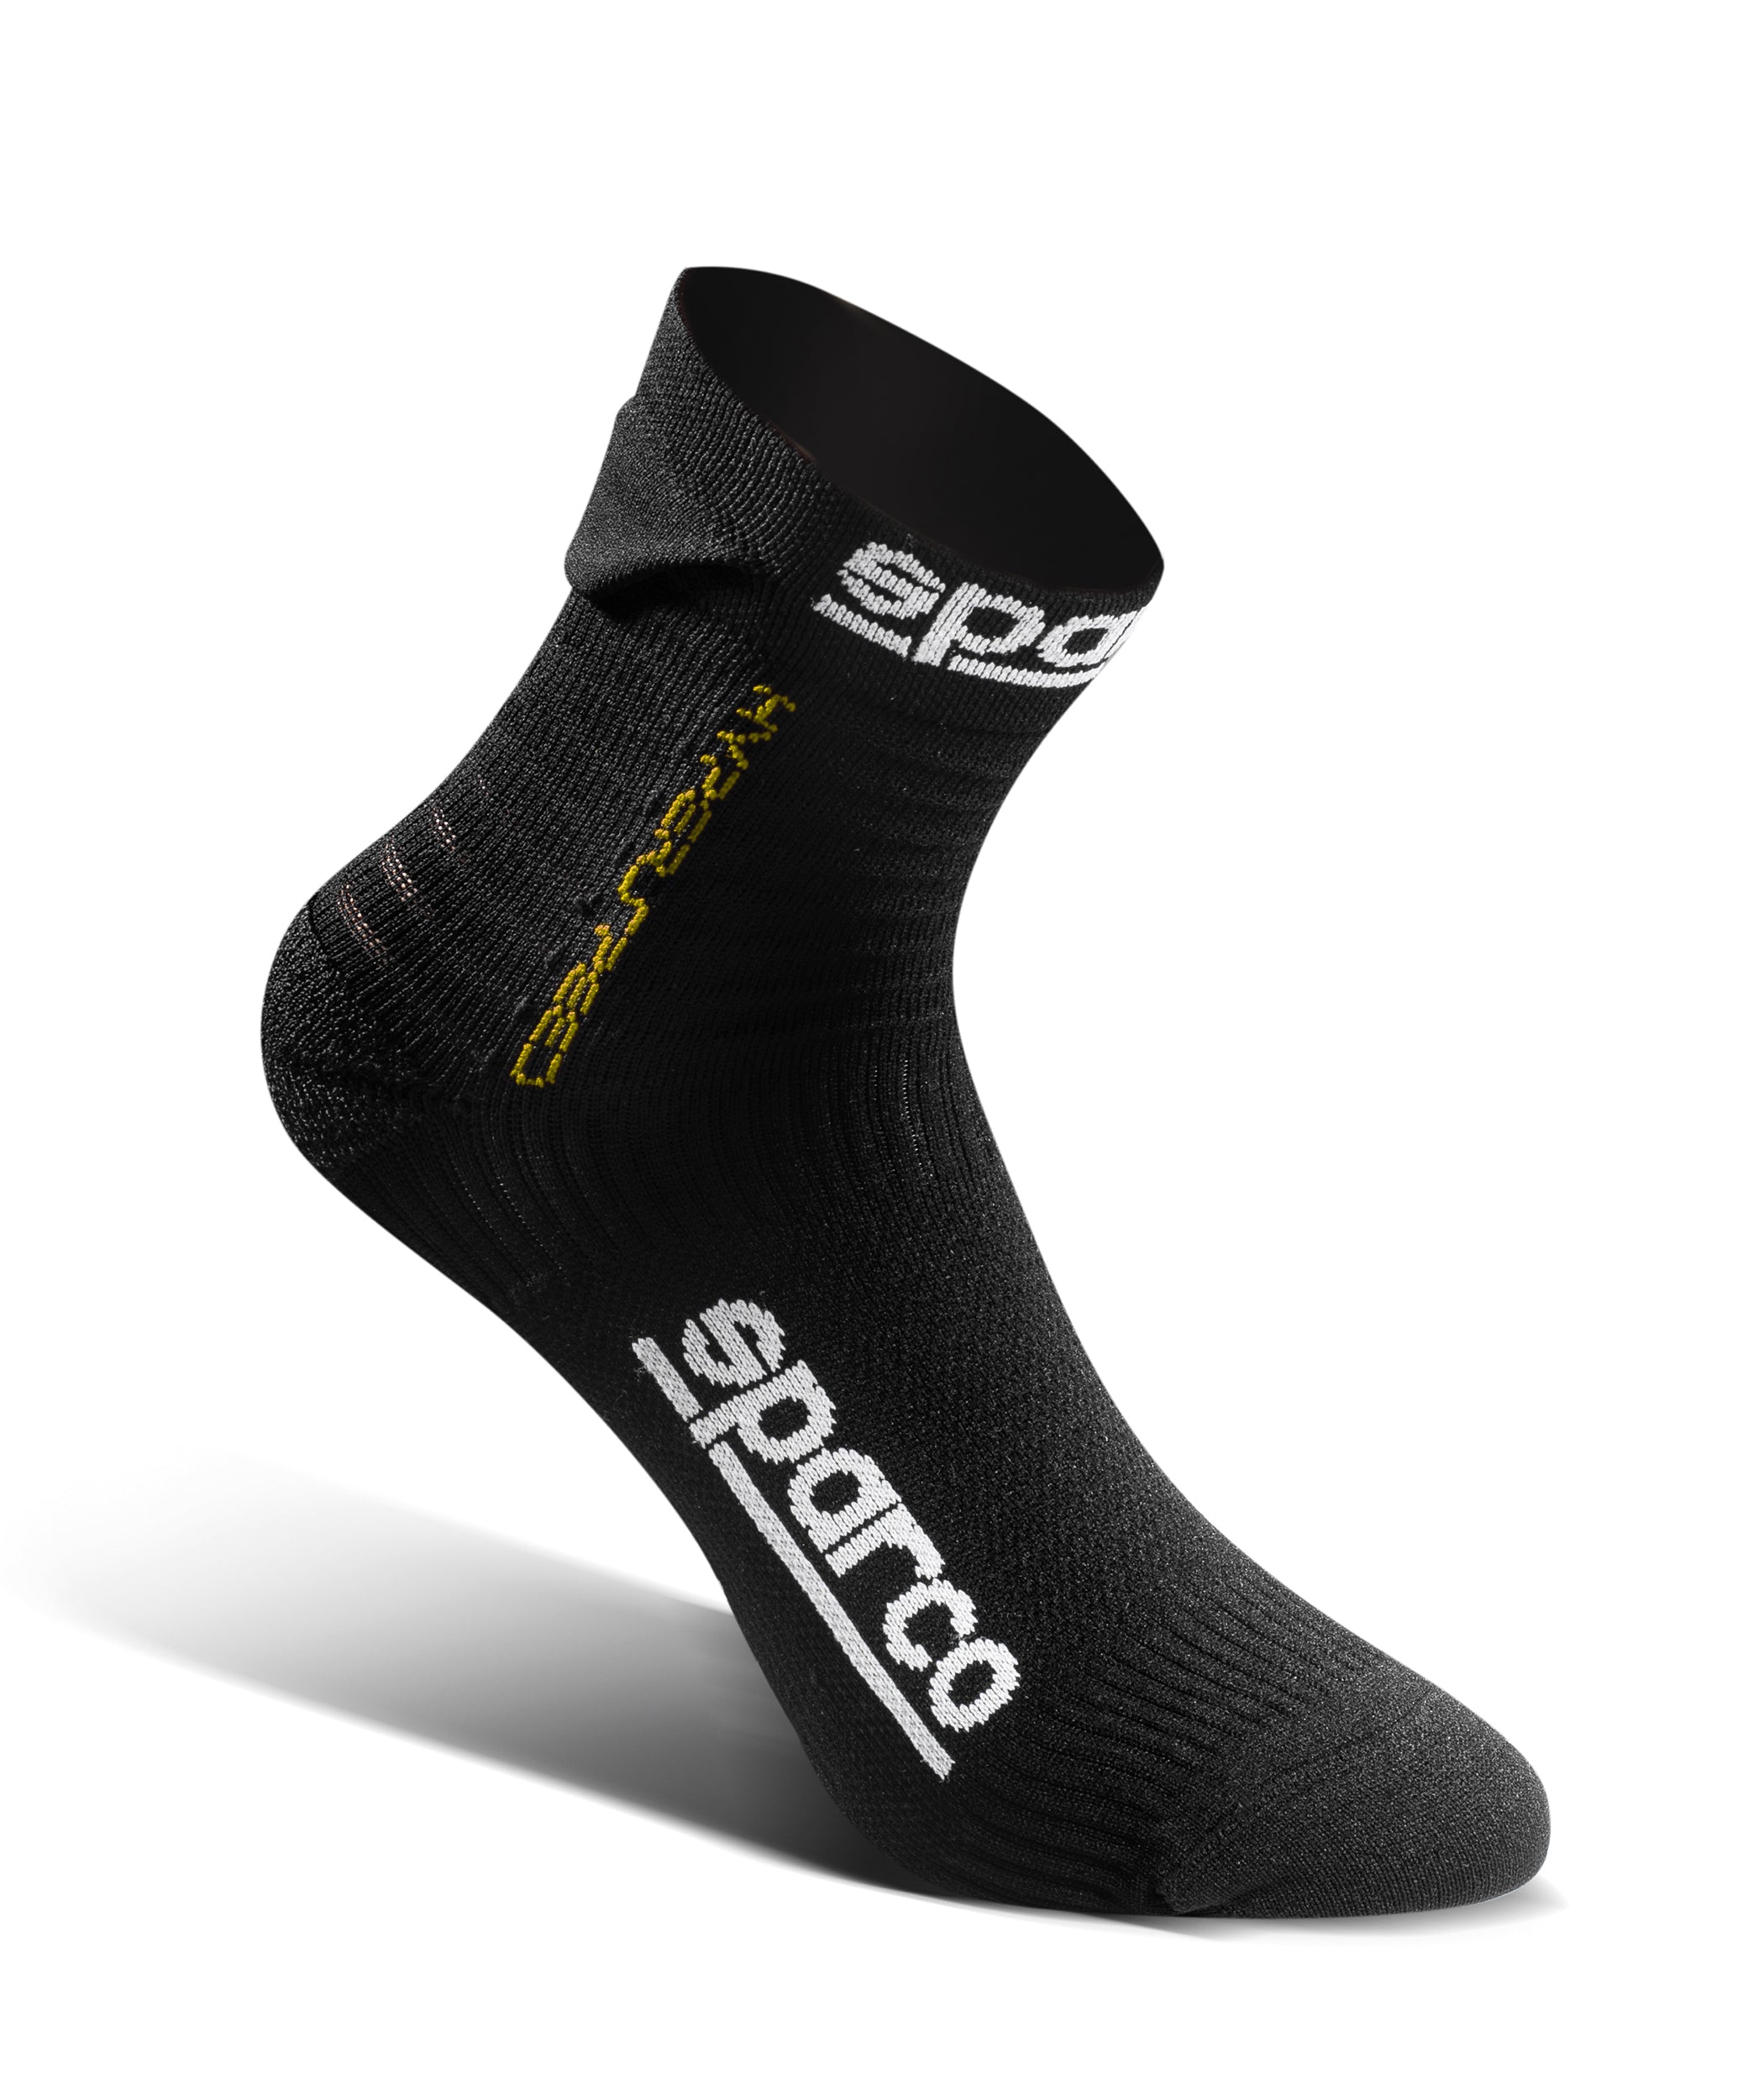 SPARCO 01290NRGF4647 Driving socks HYPERSPEED, black/yellow, size 46/47 Photo-0 